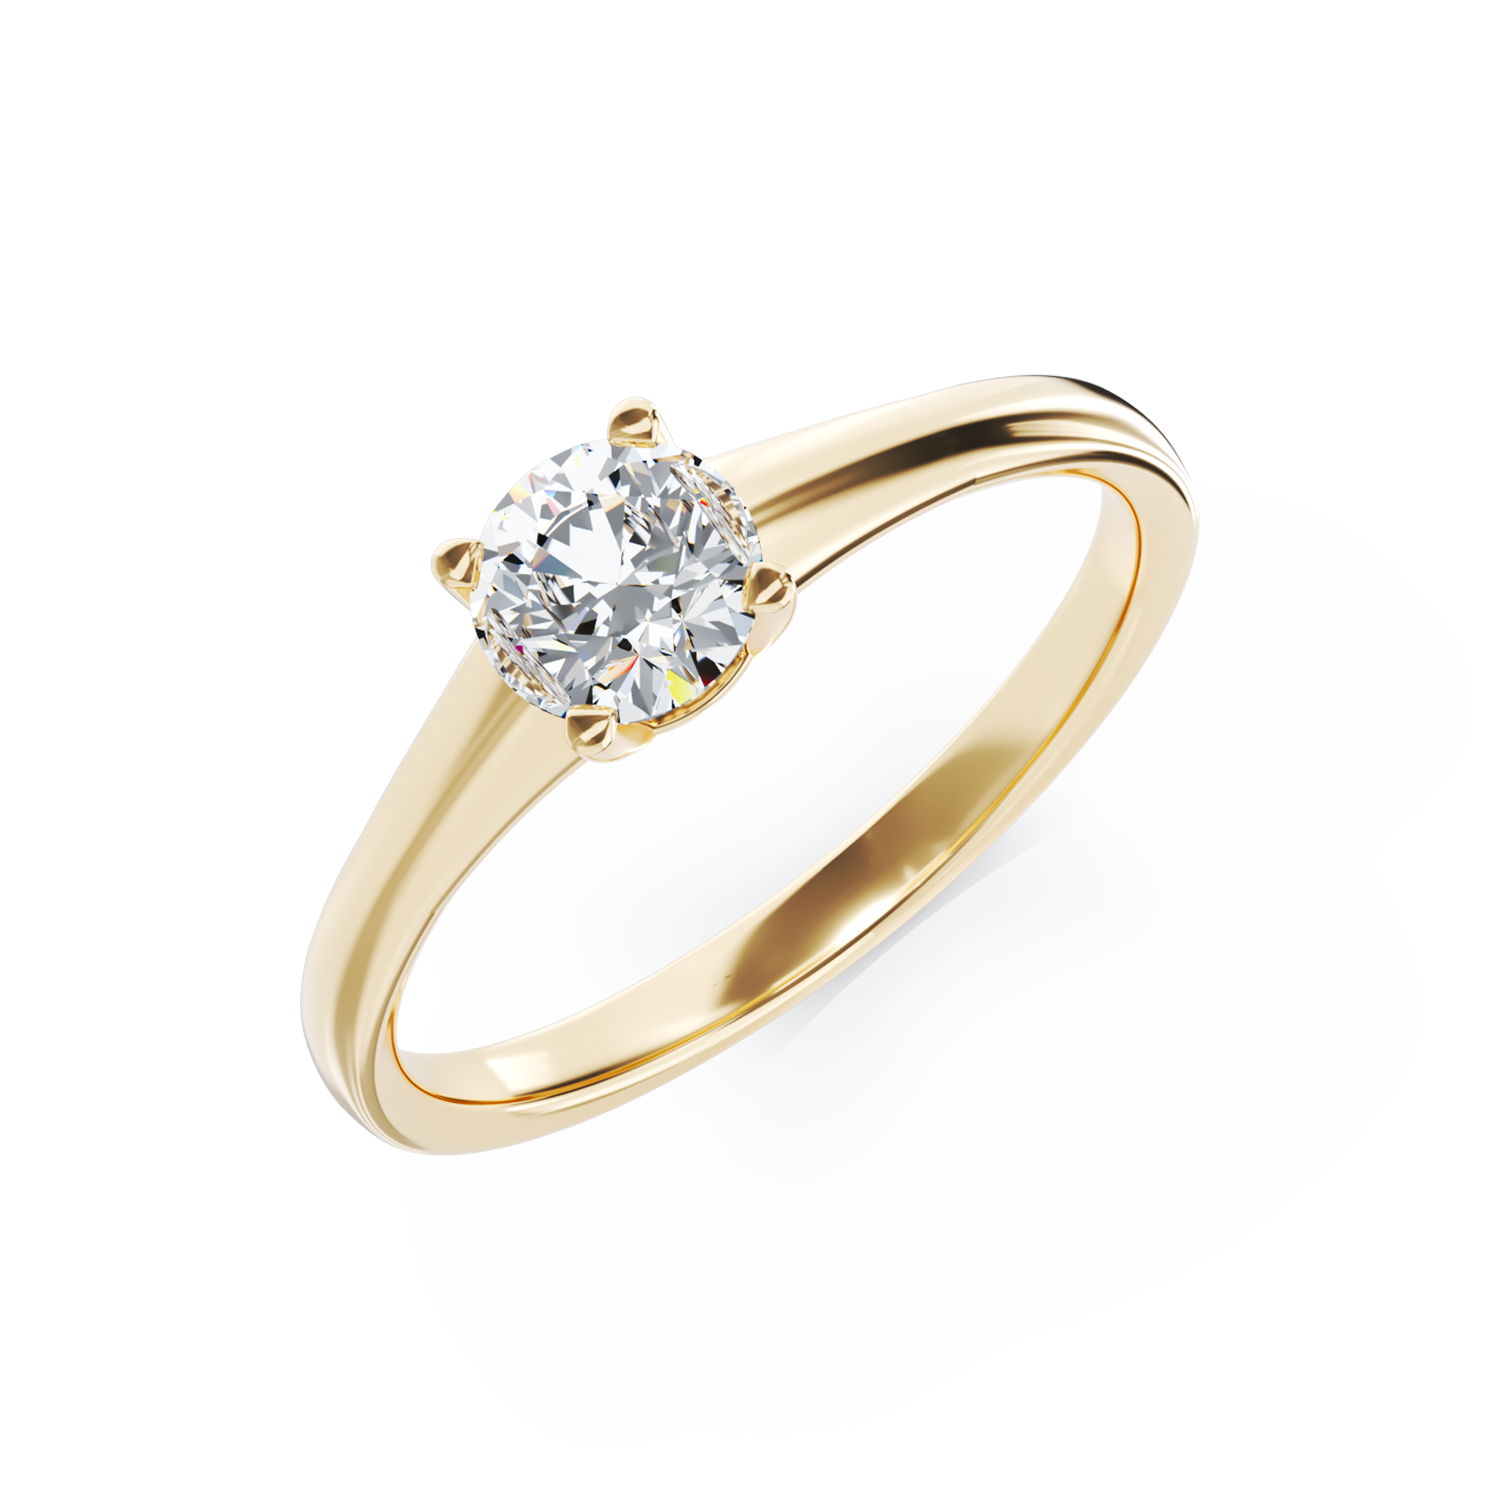 18K yellow gold engagement ring with 0.5ct solitaire diamond